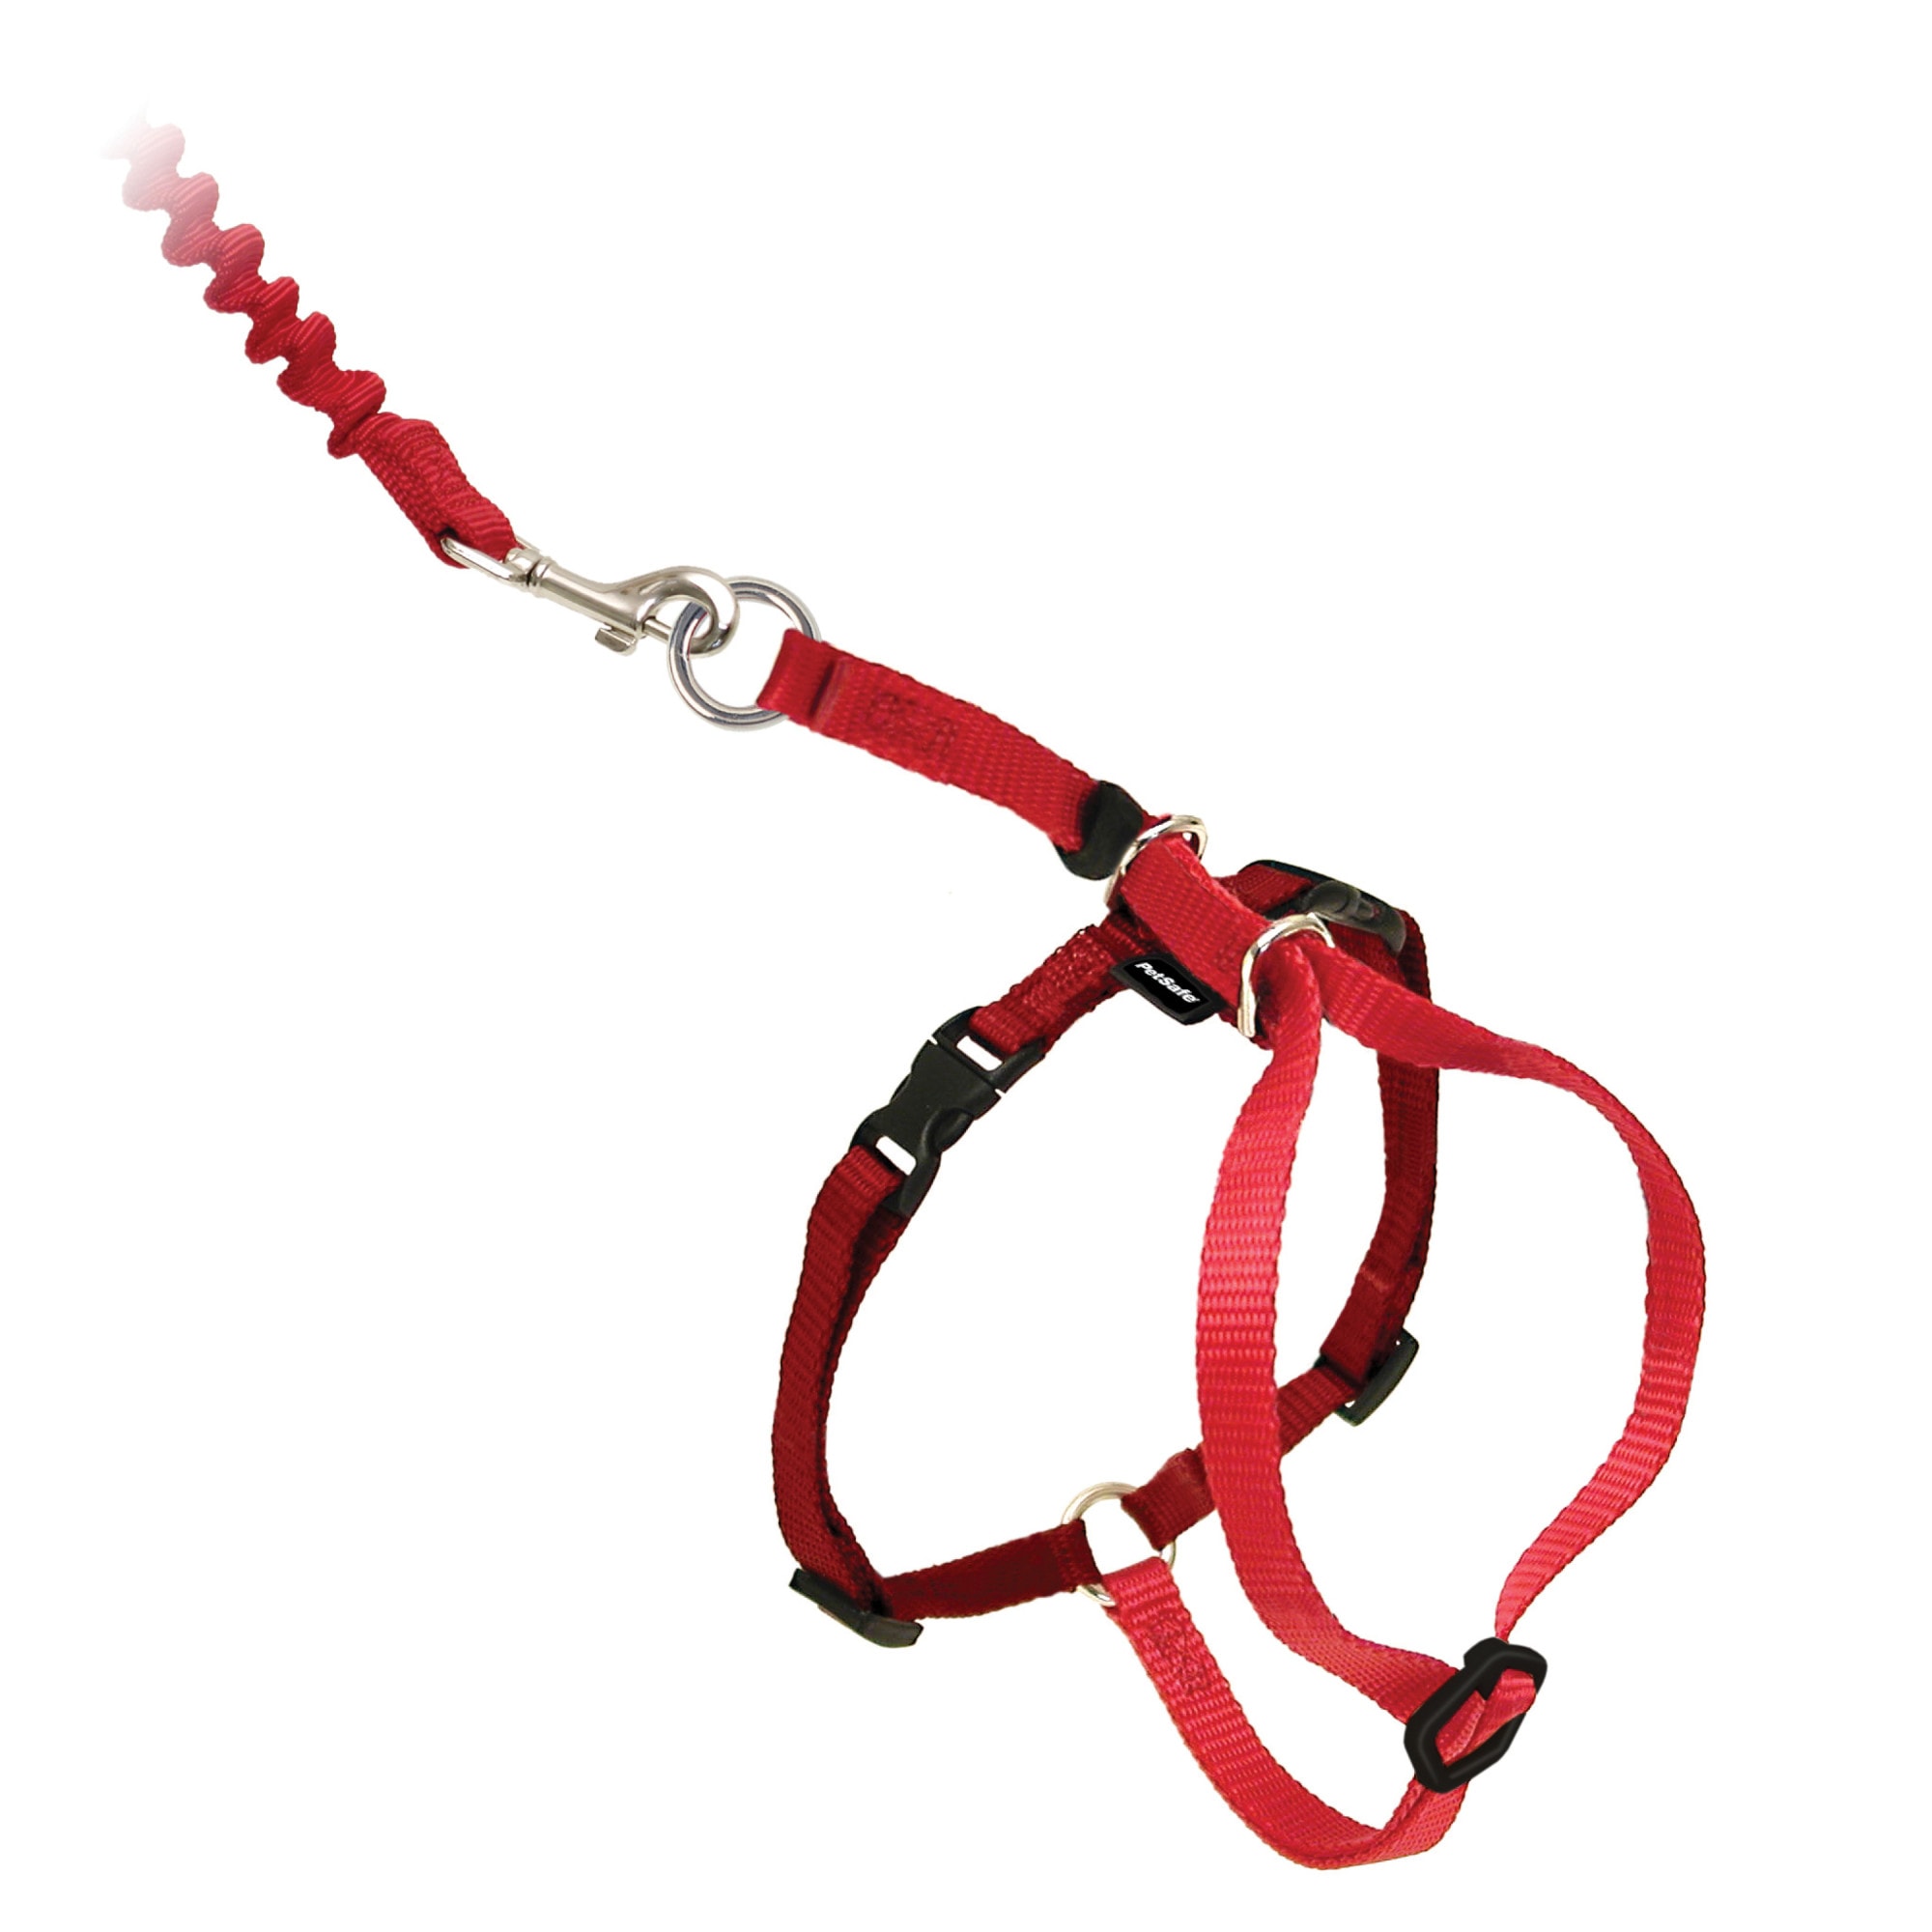 Photos - Collar / Harnesses PetSafe Gentle Leader Come with Me Kitty Harness & Bungee Leash in 